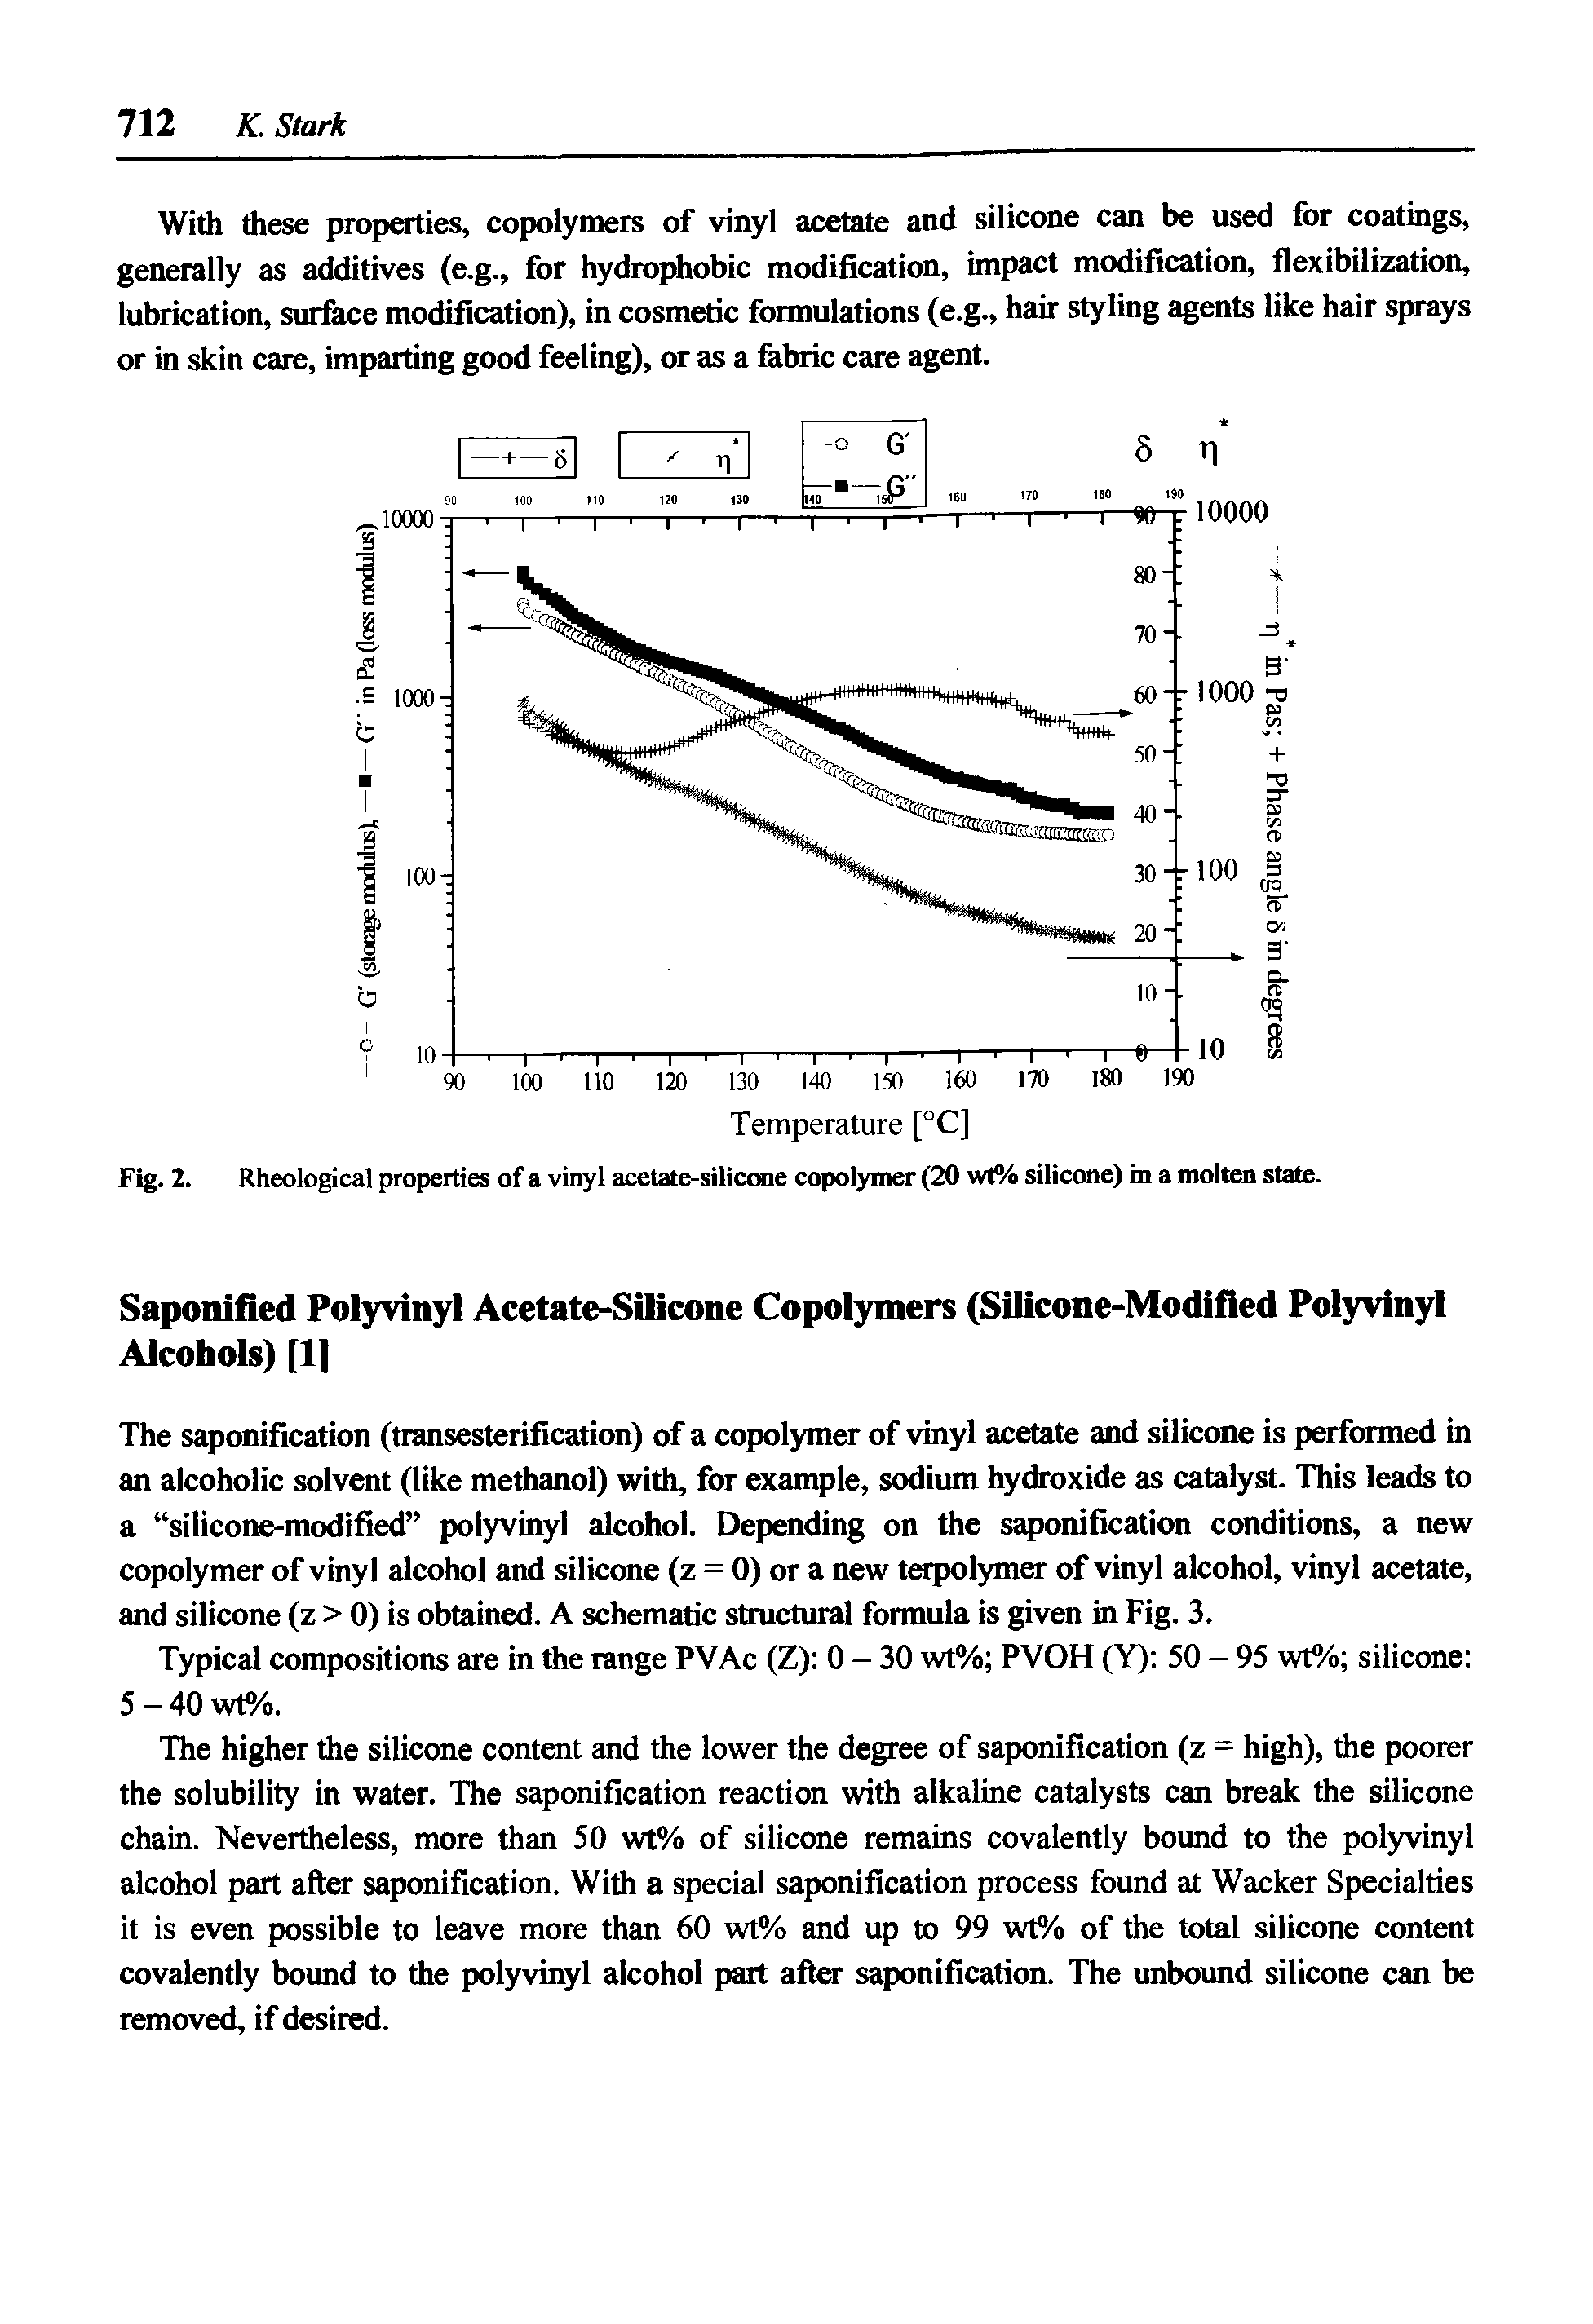 Fig. 2. Rheological properties of a vinyl acetate-silicone copolymer (20 wt% silicone) in a molten state.